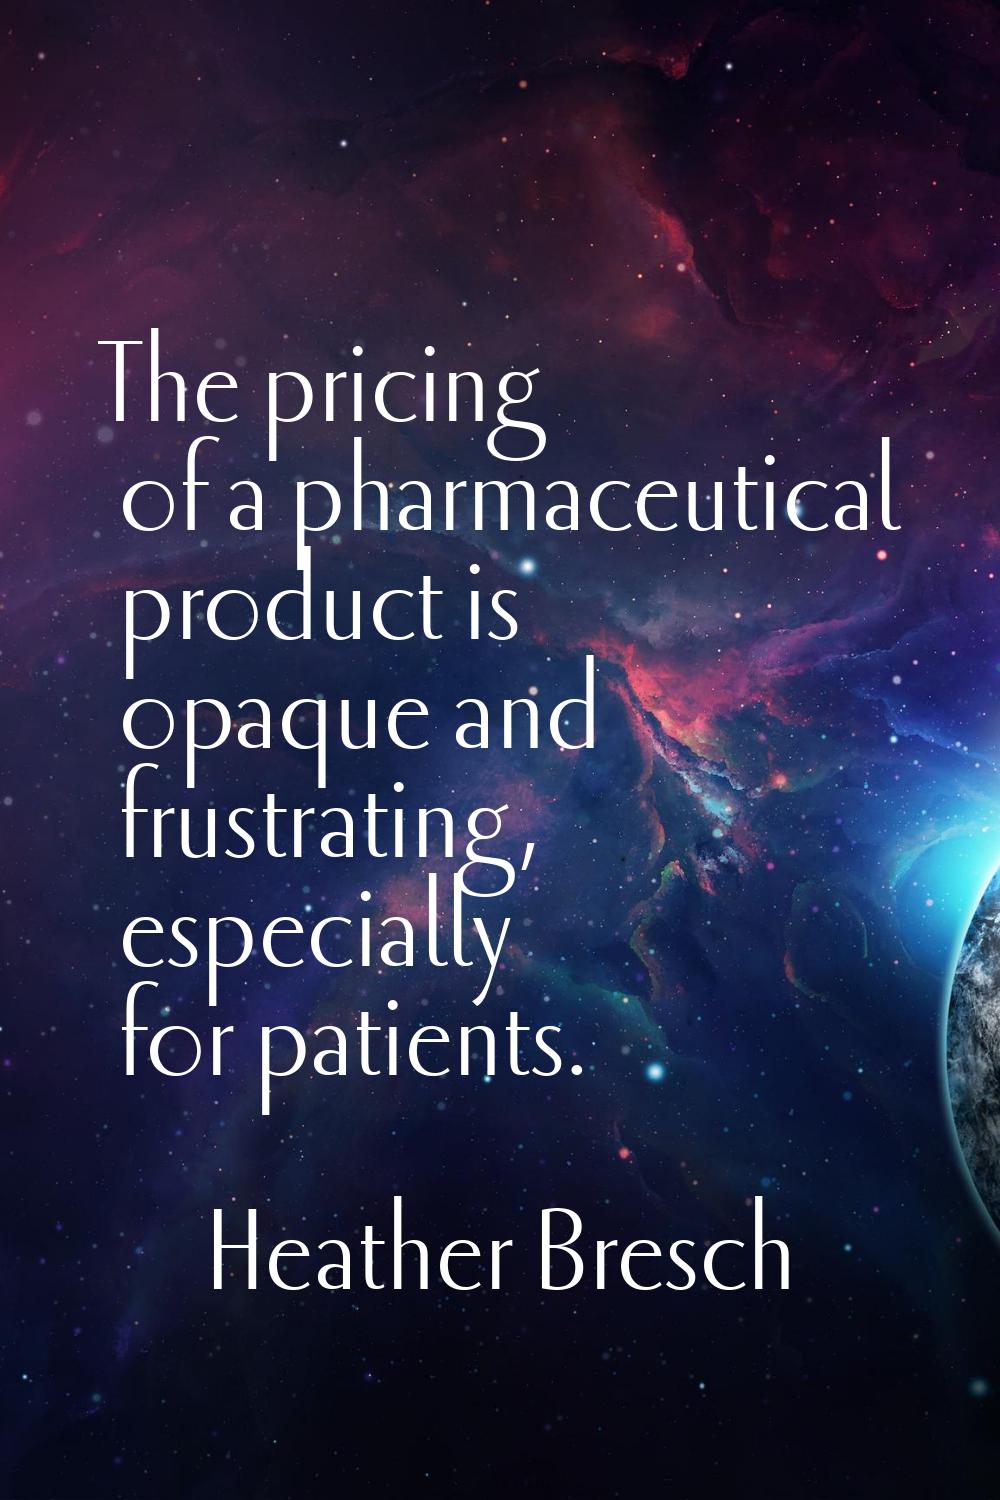 The pricing of a pharmaceutical product is opaque and frustrating, especially for patients.